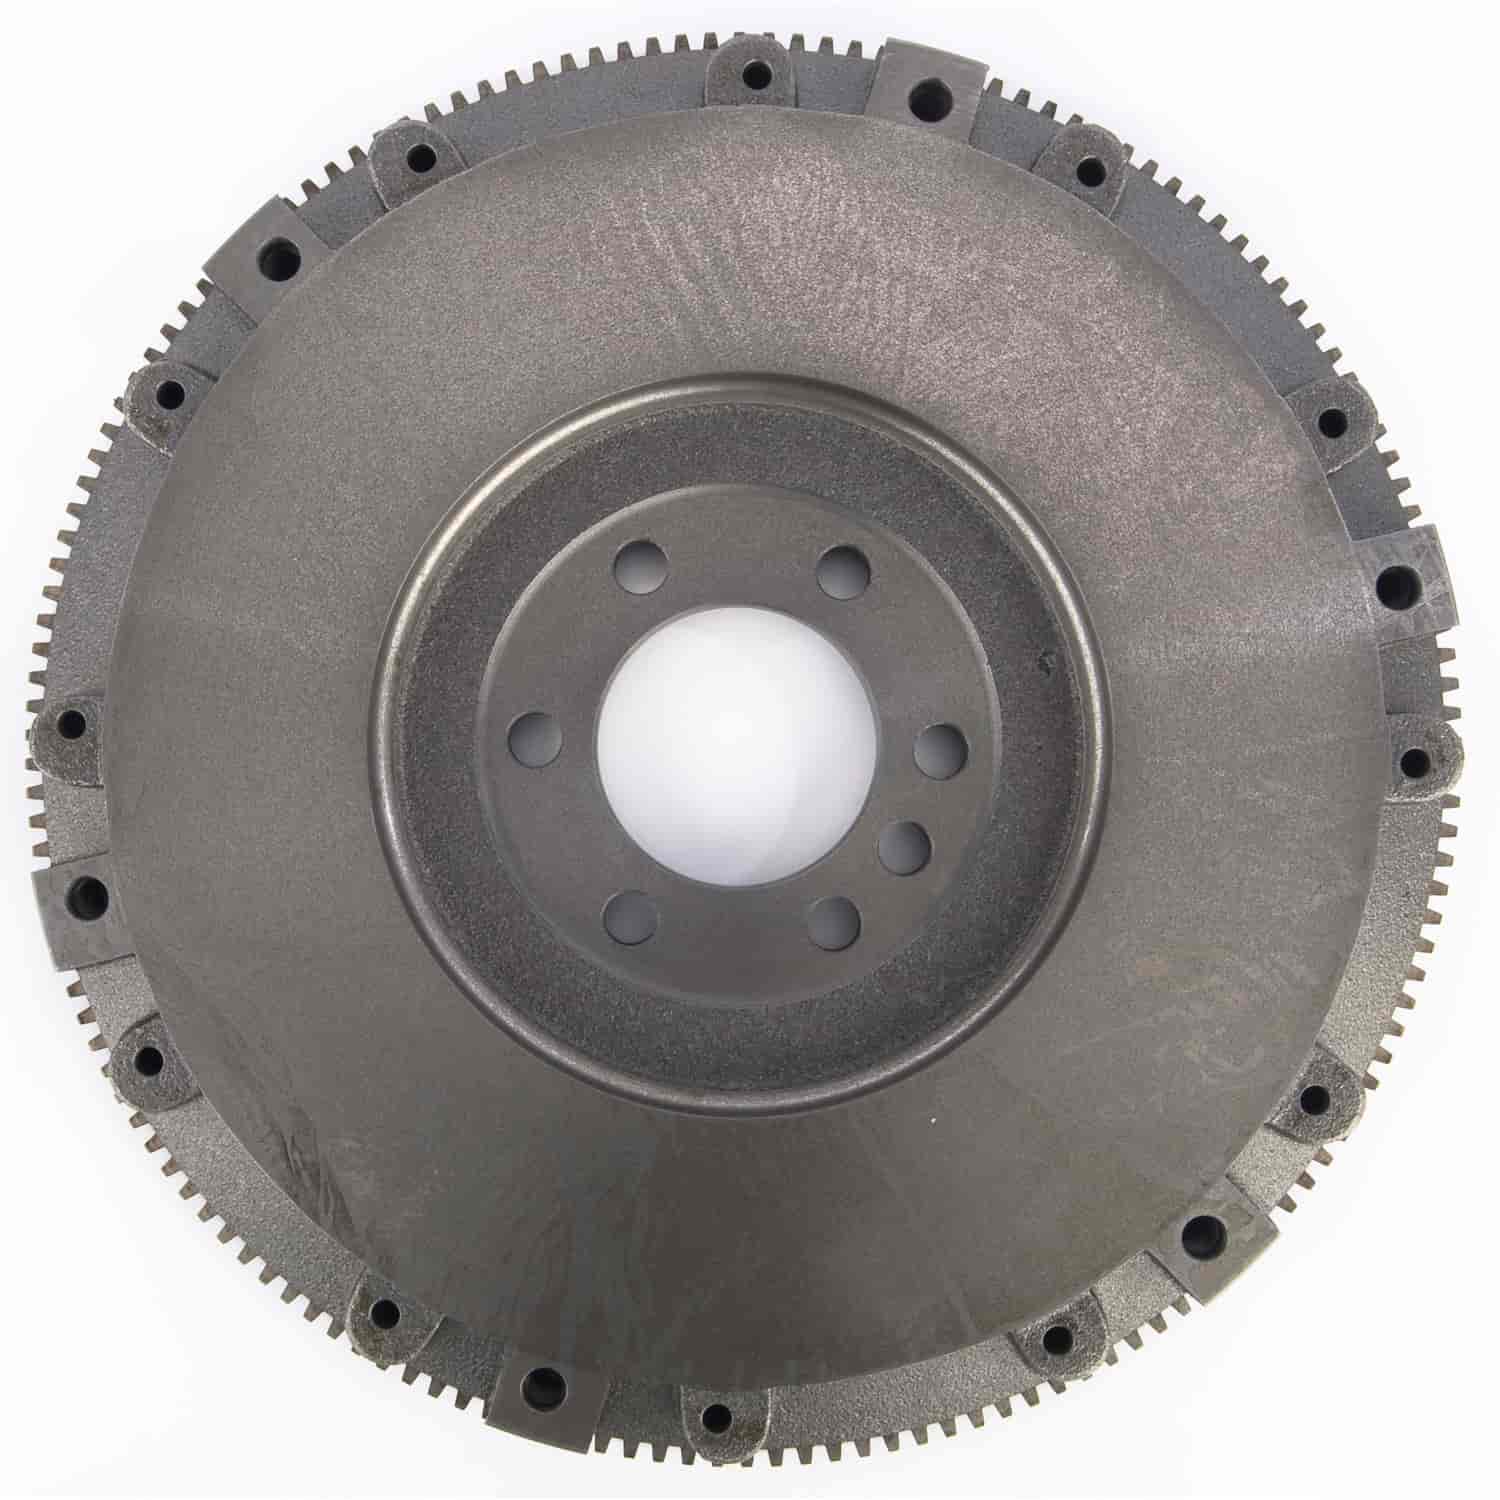 Flywheel for 1955-1985 Small Block Chevy, 153-Tooth [Internally